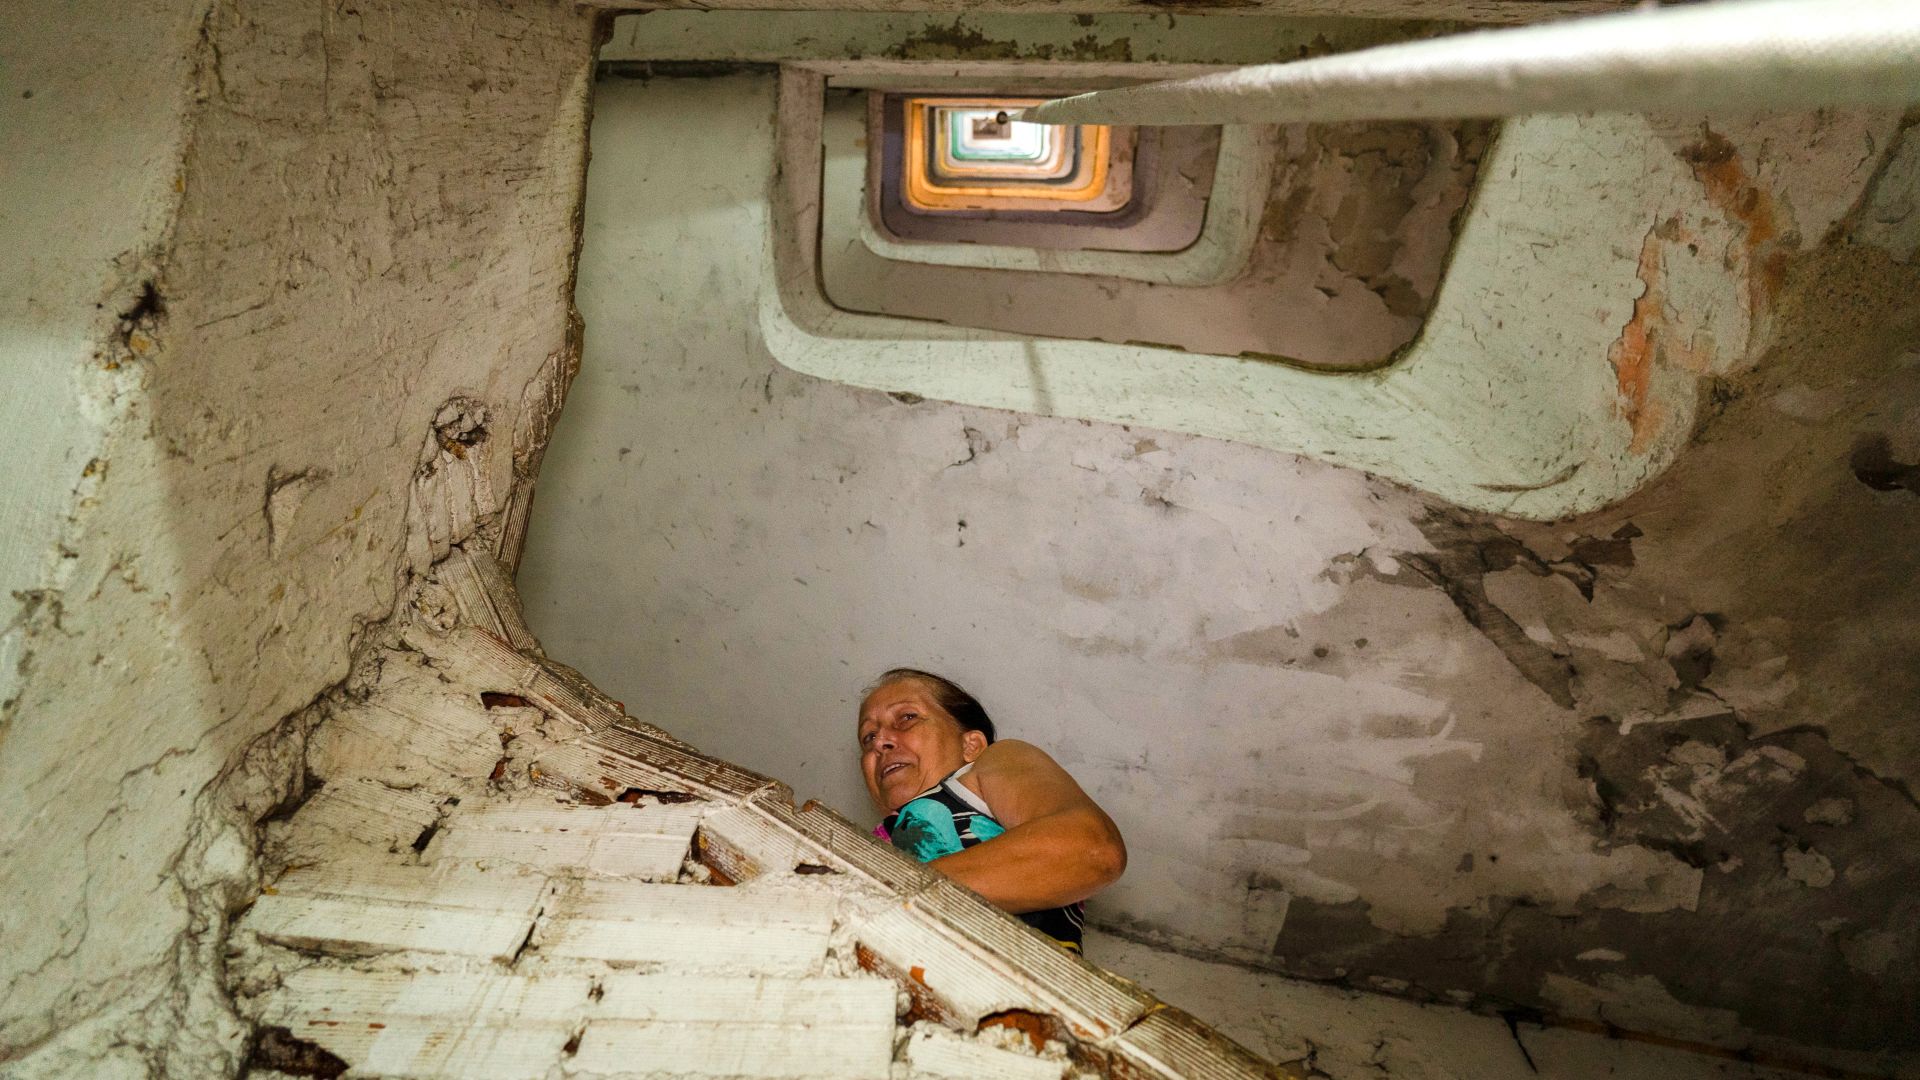 A resident is seen climbing the stairs of the 21-story high building.